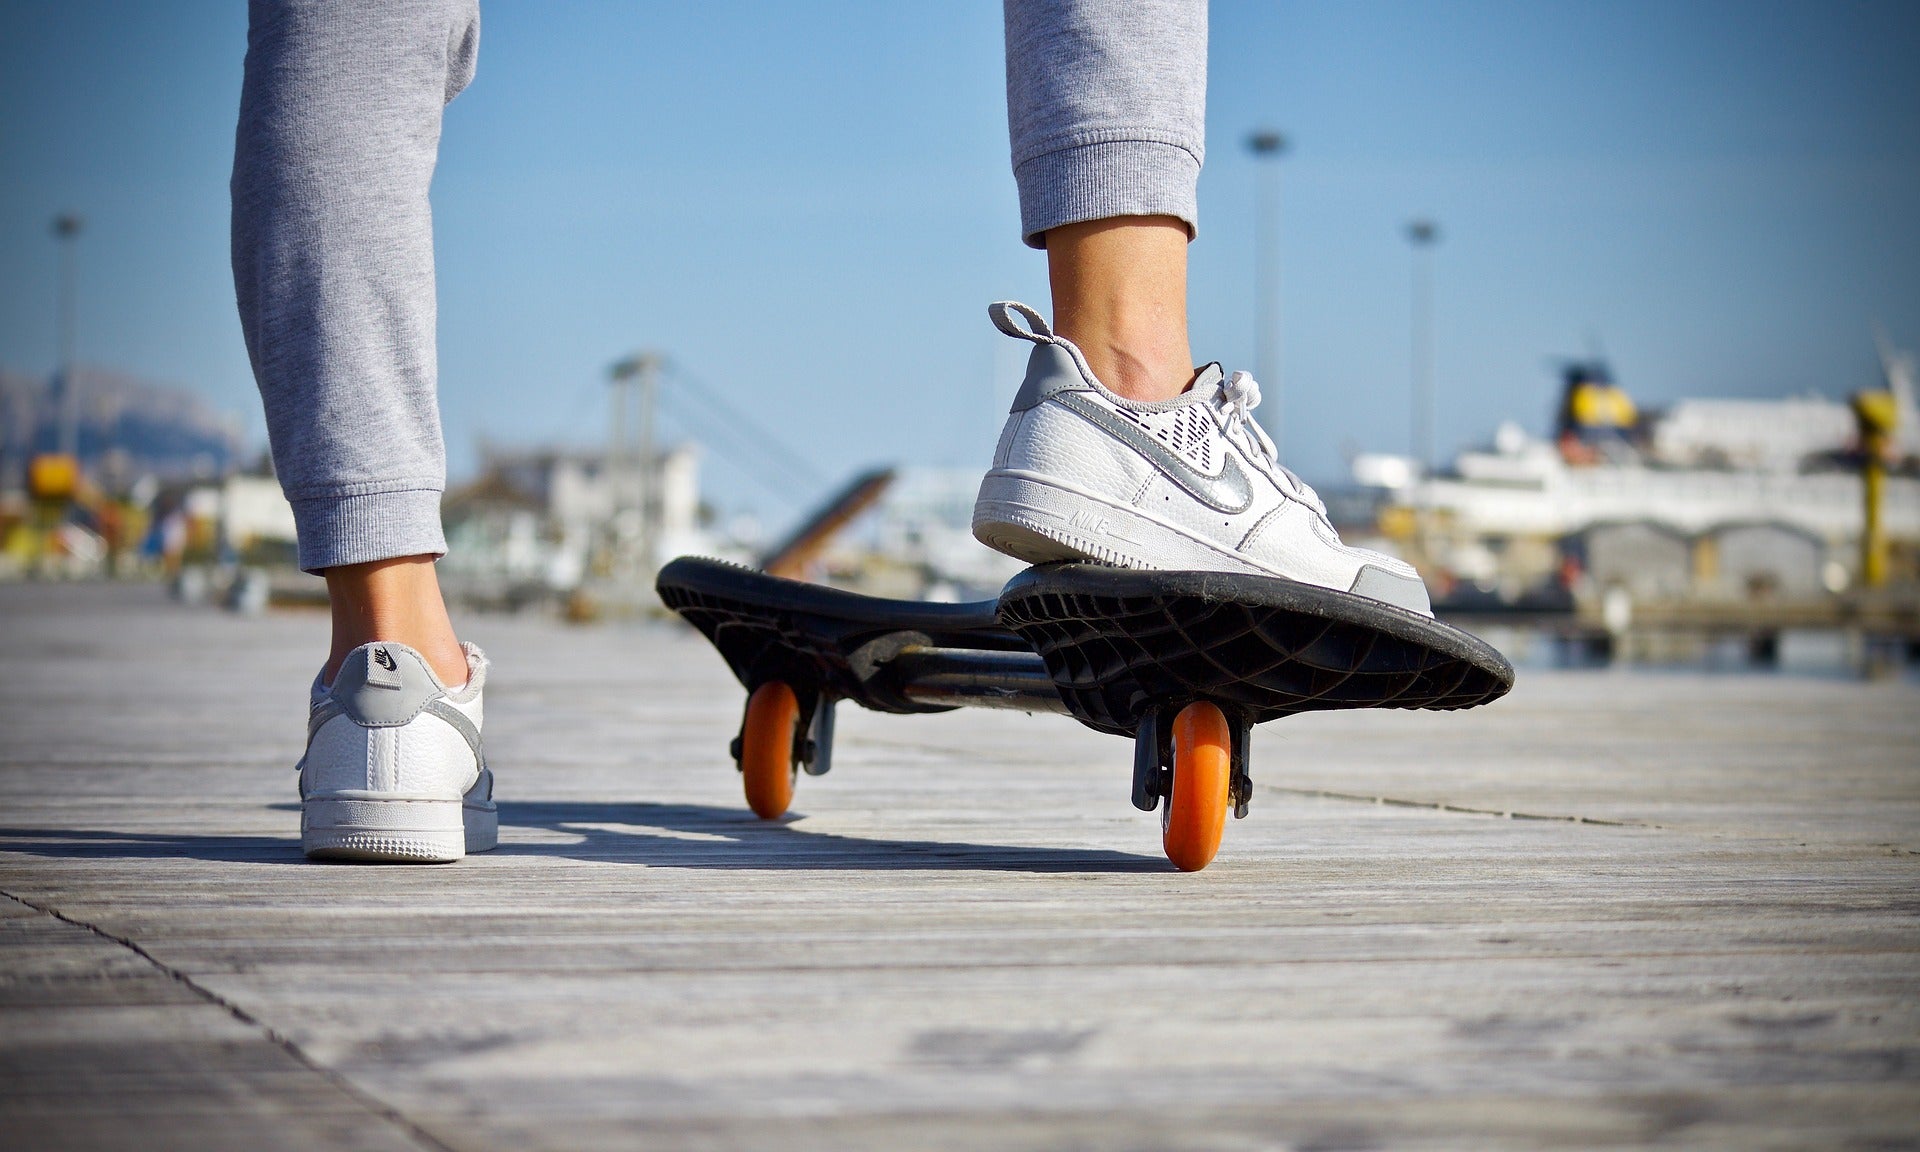 Person about to ride skateboard with just their feet shown